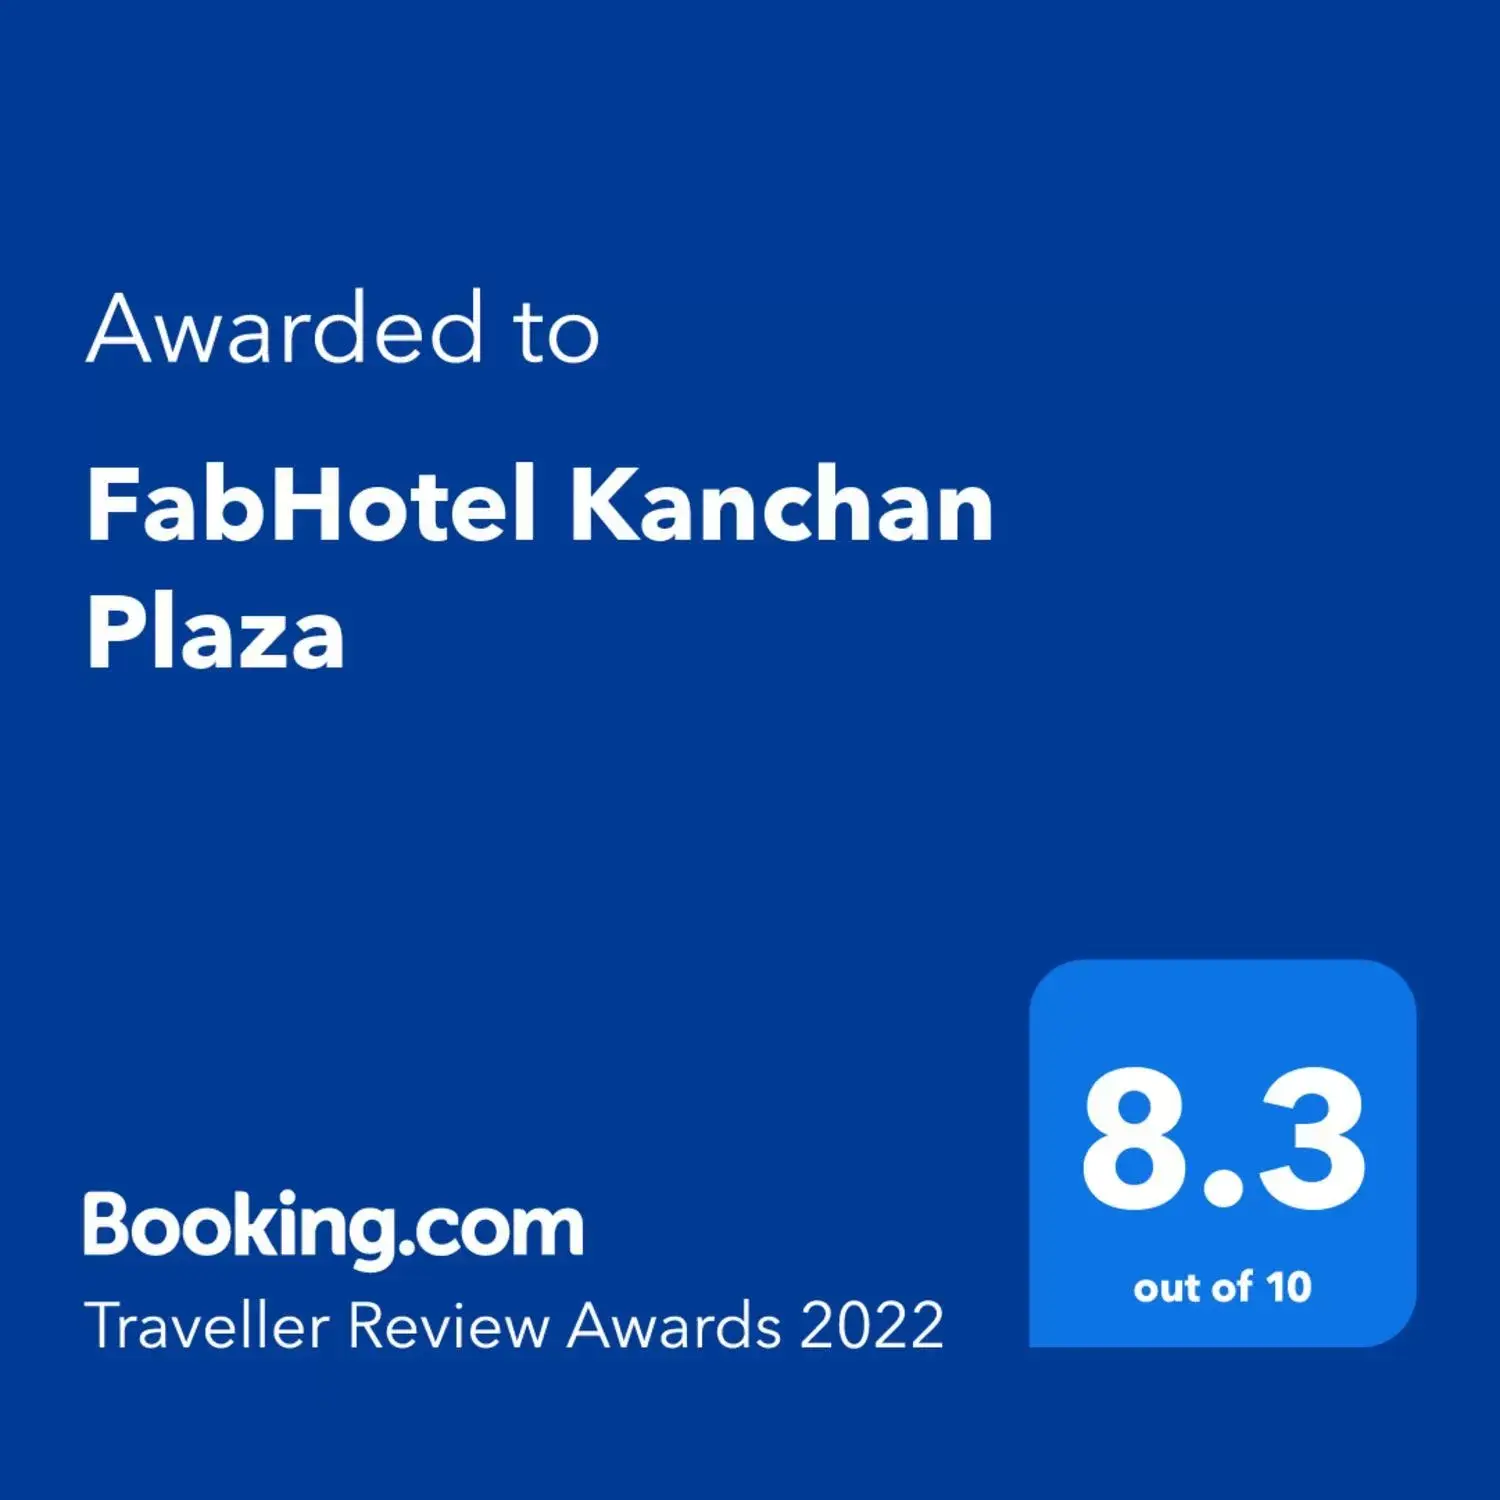 Other, Logo/Certificate/Sign/Award in FabHotel Kanchan Plaza